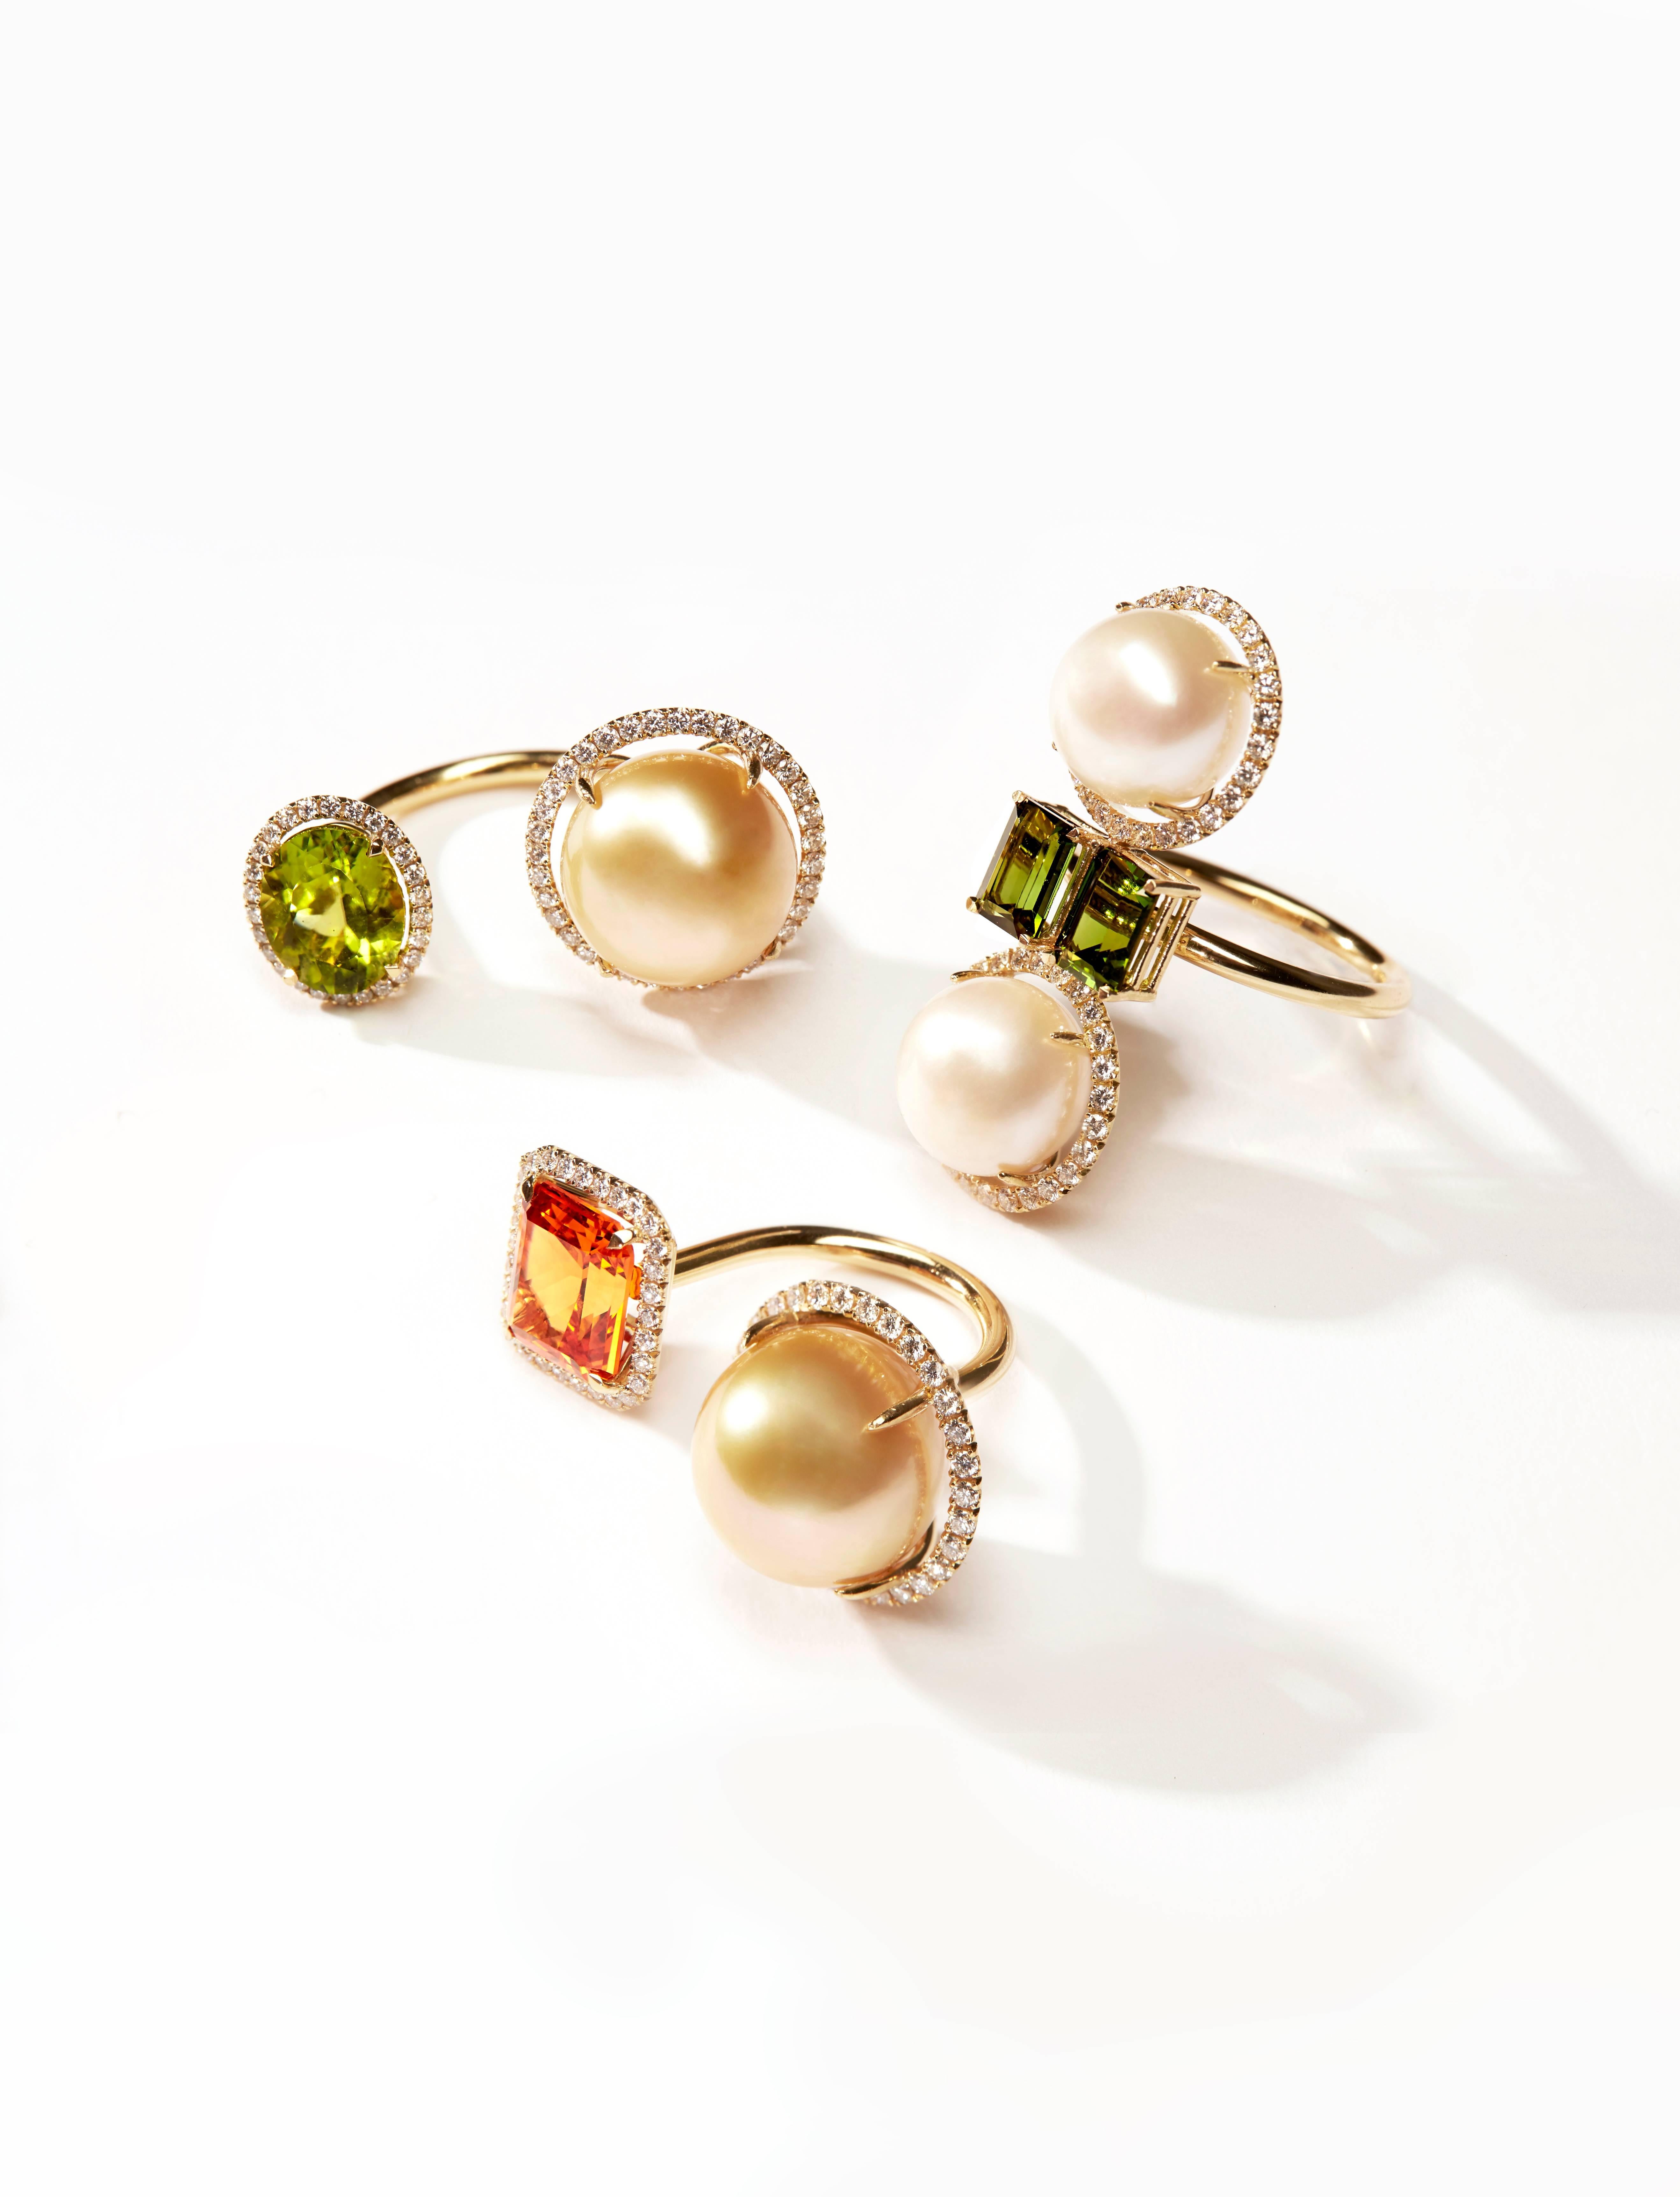 Art Deco Nadine Aysoy Yellow Gold Green Peridot and South Sea Pearl Diamond Cocktail Ring For Sale